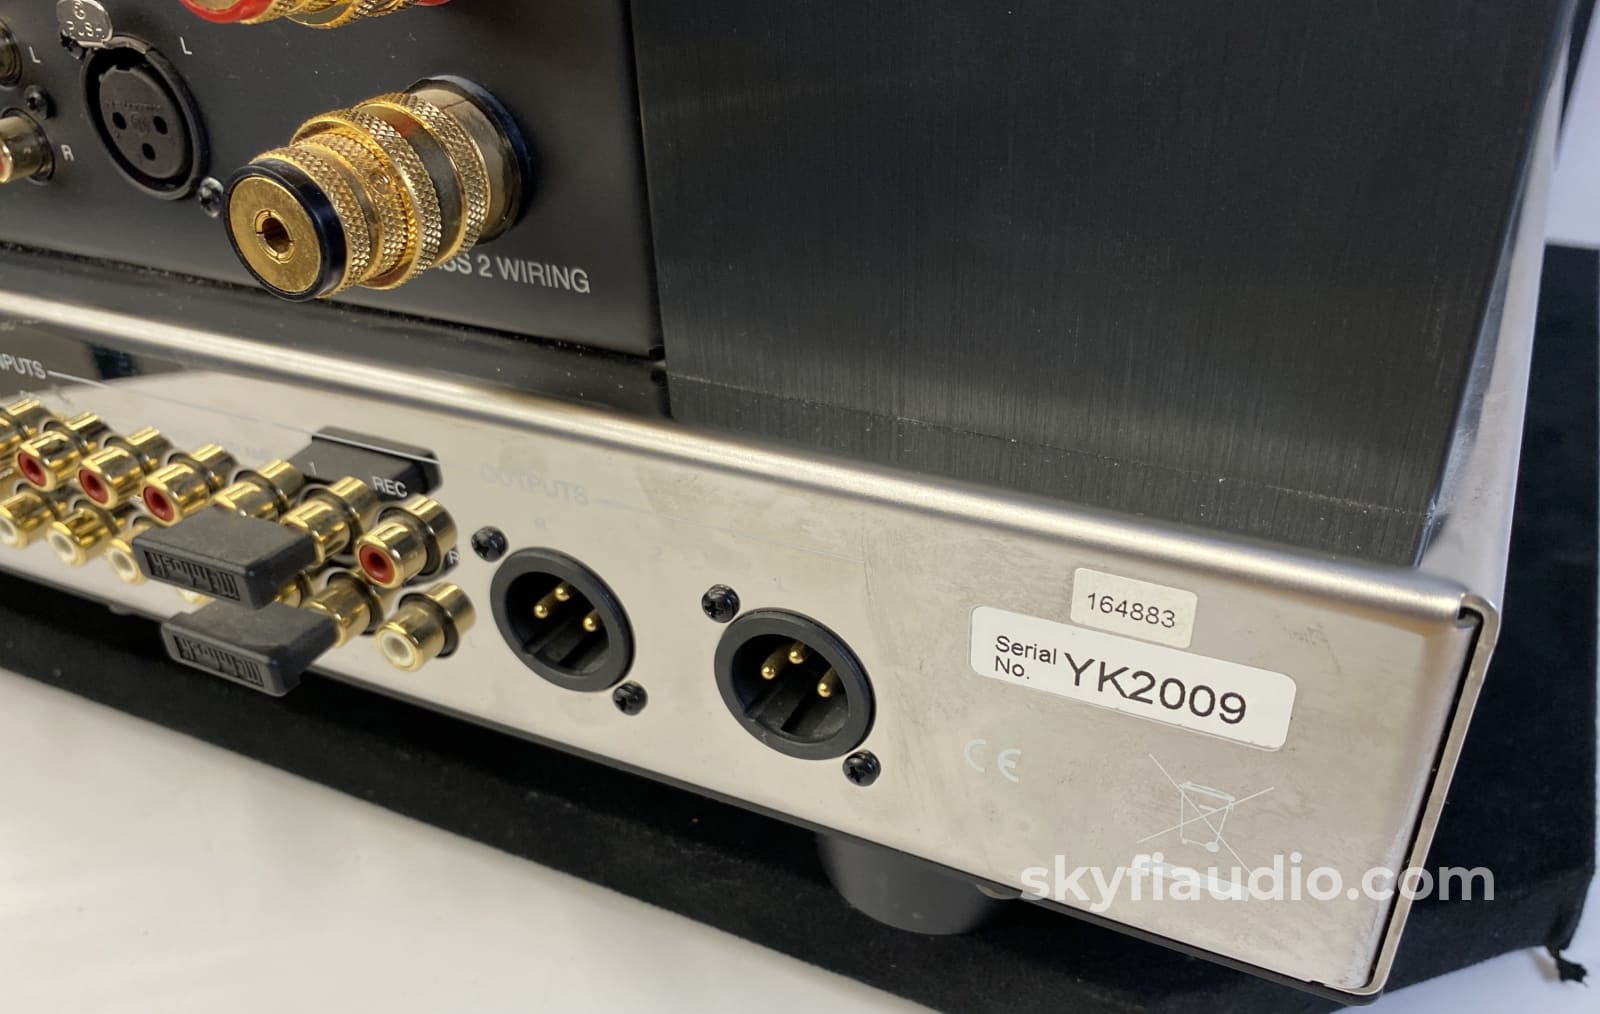 Mcintosh Ma7000 Integrated Amplifier - Big Power And Eq!